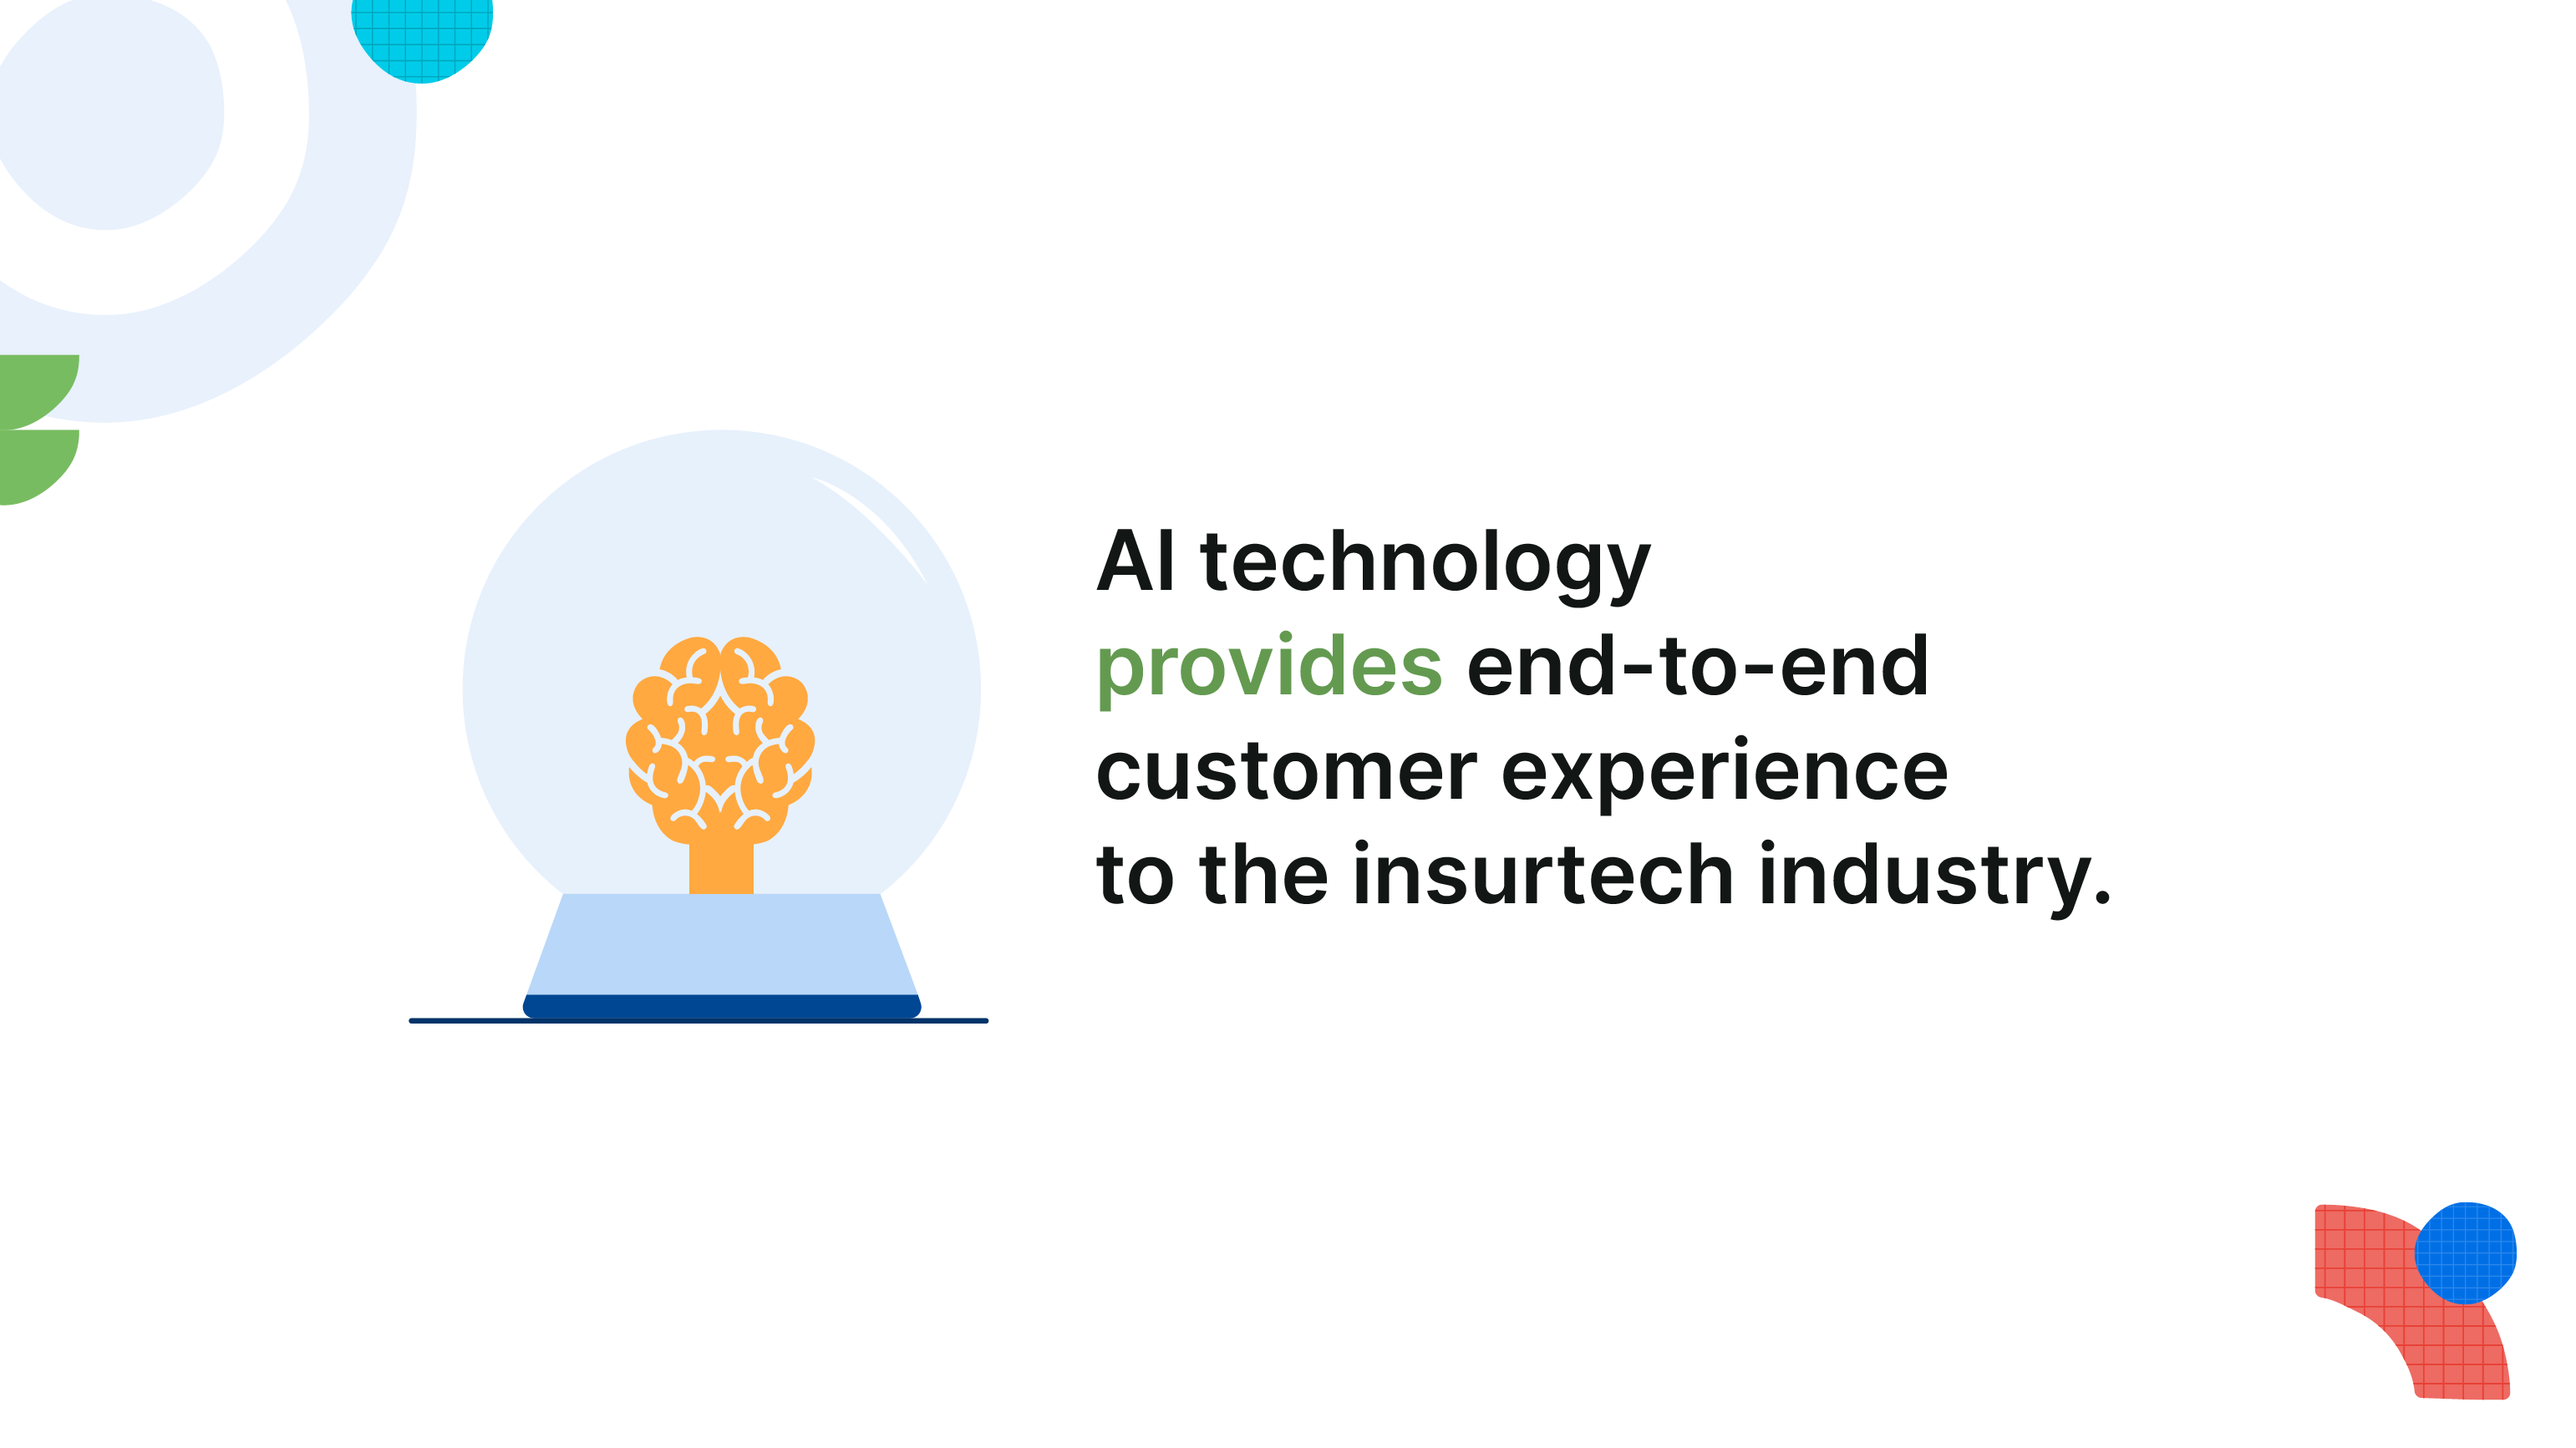 AI is the new way to improve the insurtech industry.